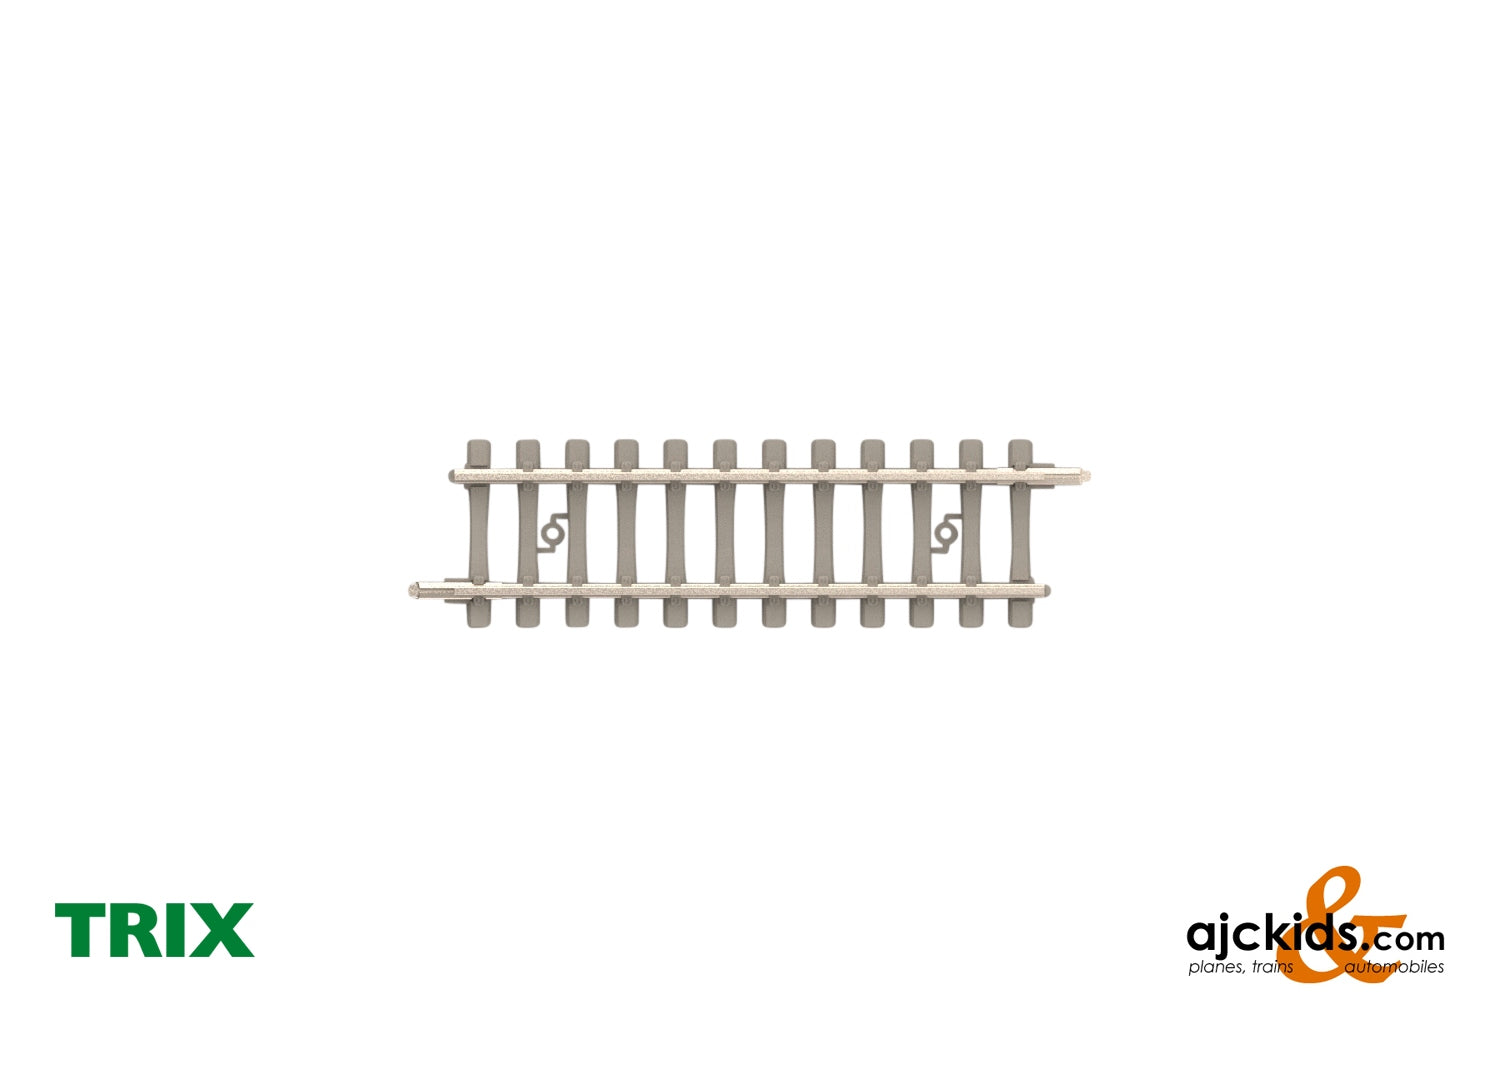 Trix 14507 - Straight Track with Concrete Ties